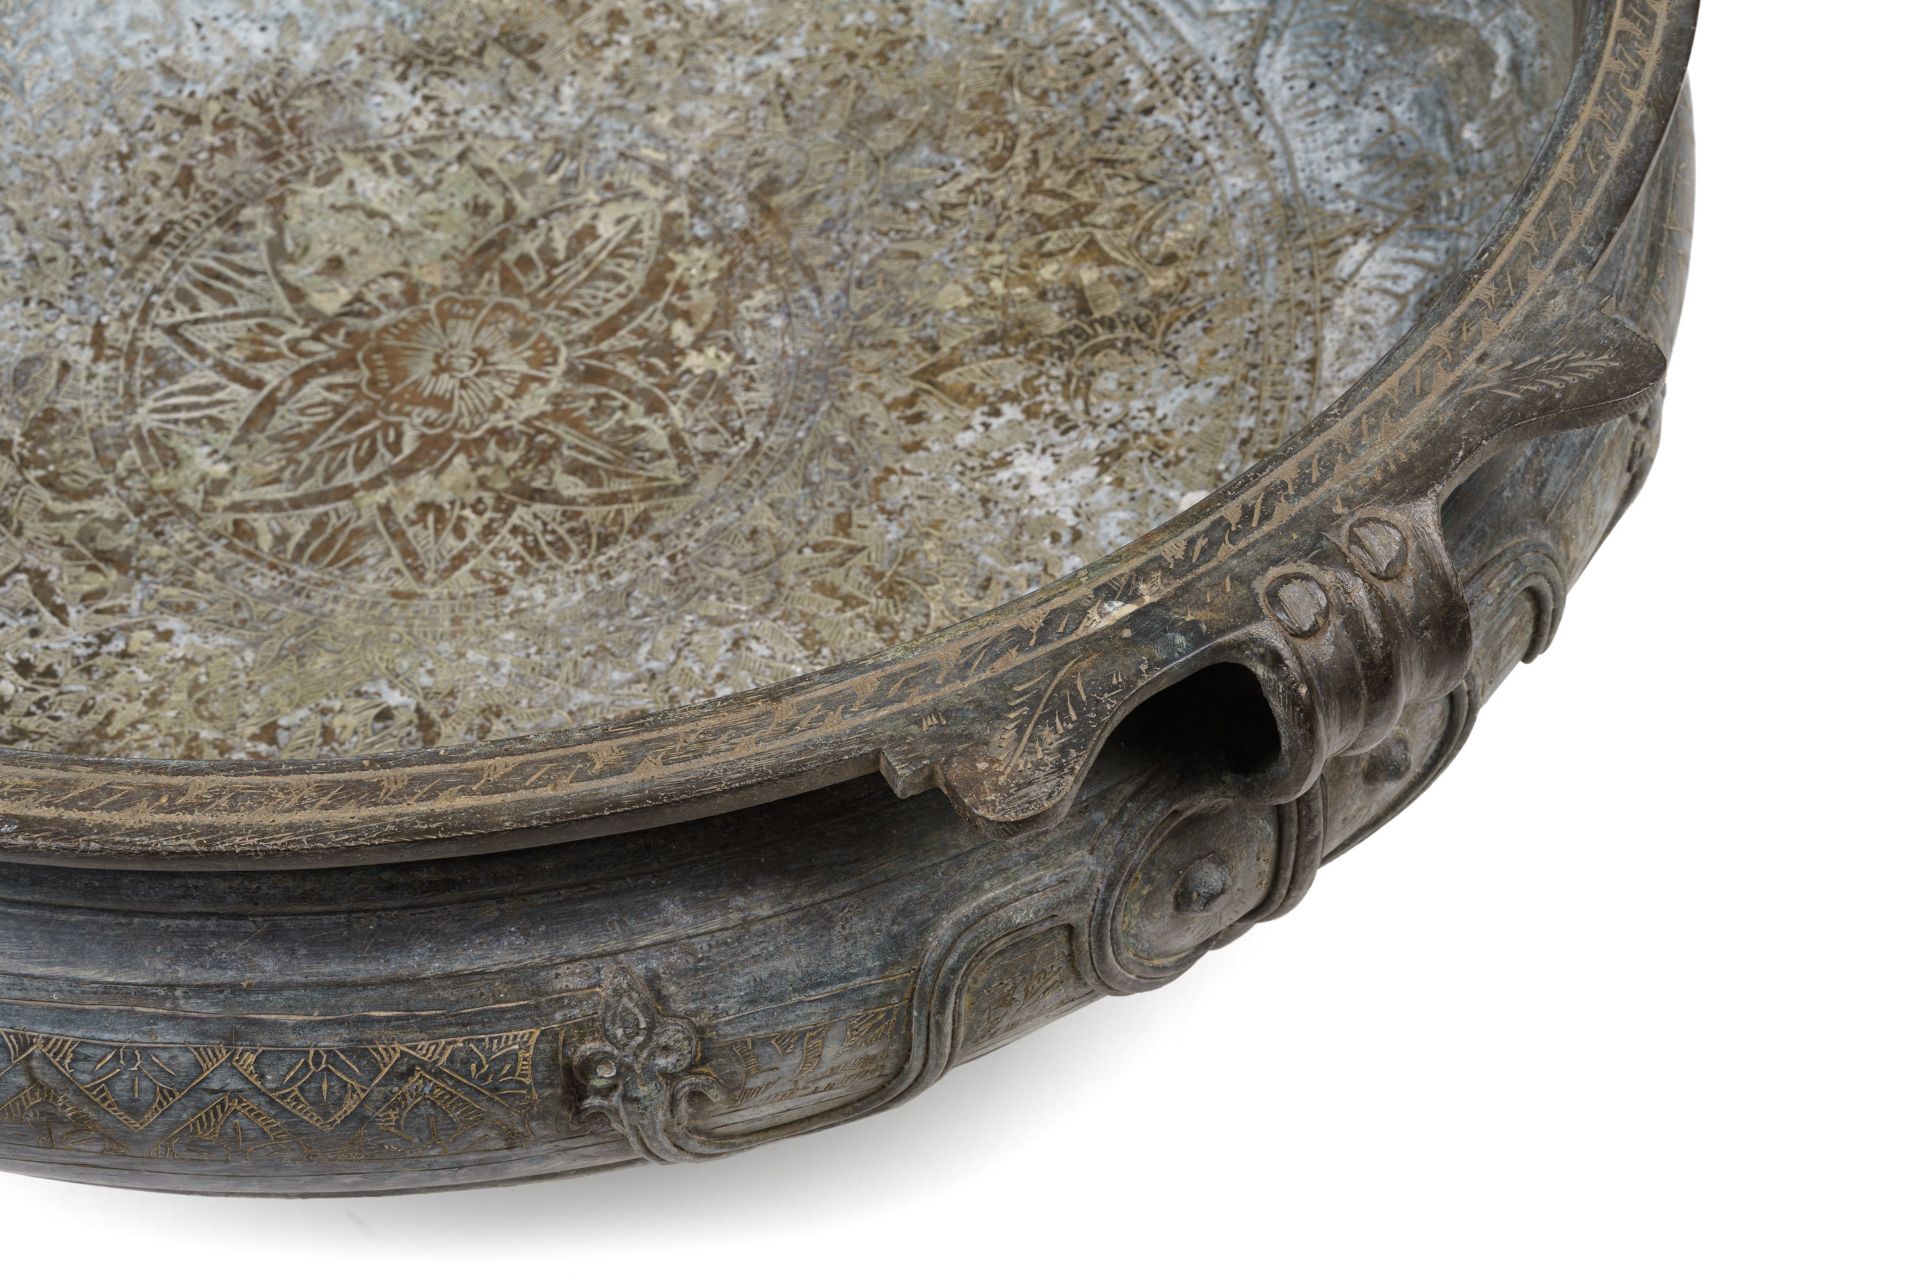 Large temple bowl - Uruli. Kerala, South India. Probably 19th century / early 20th century. 20t... - Image 12 of 14